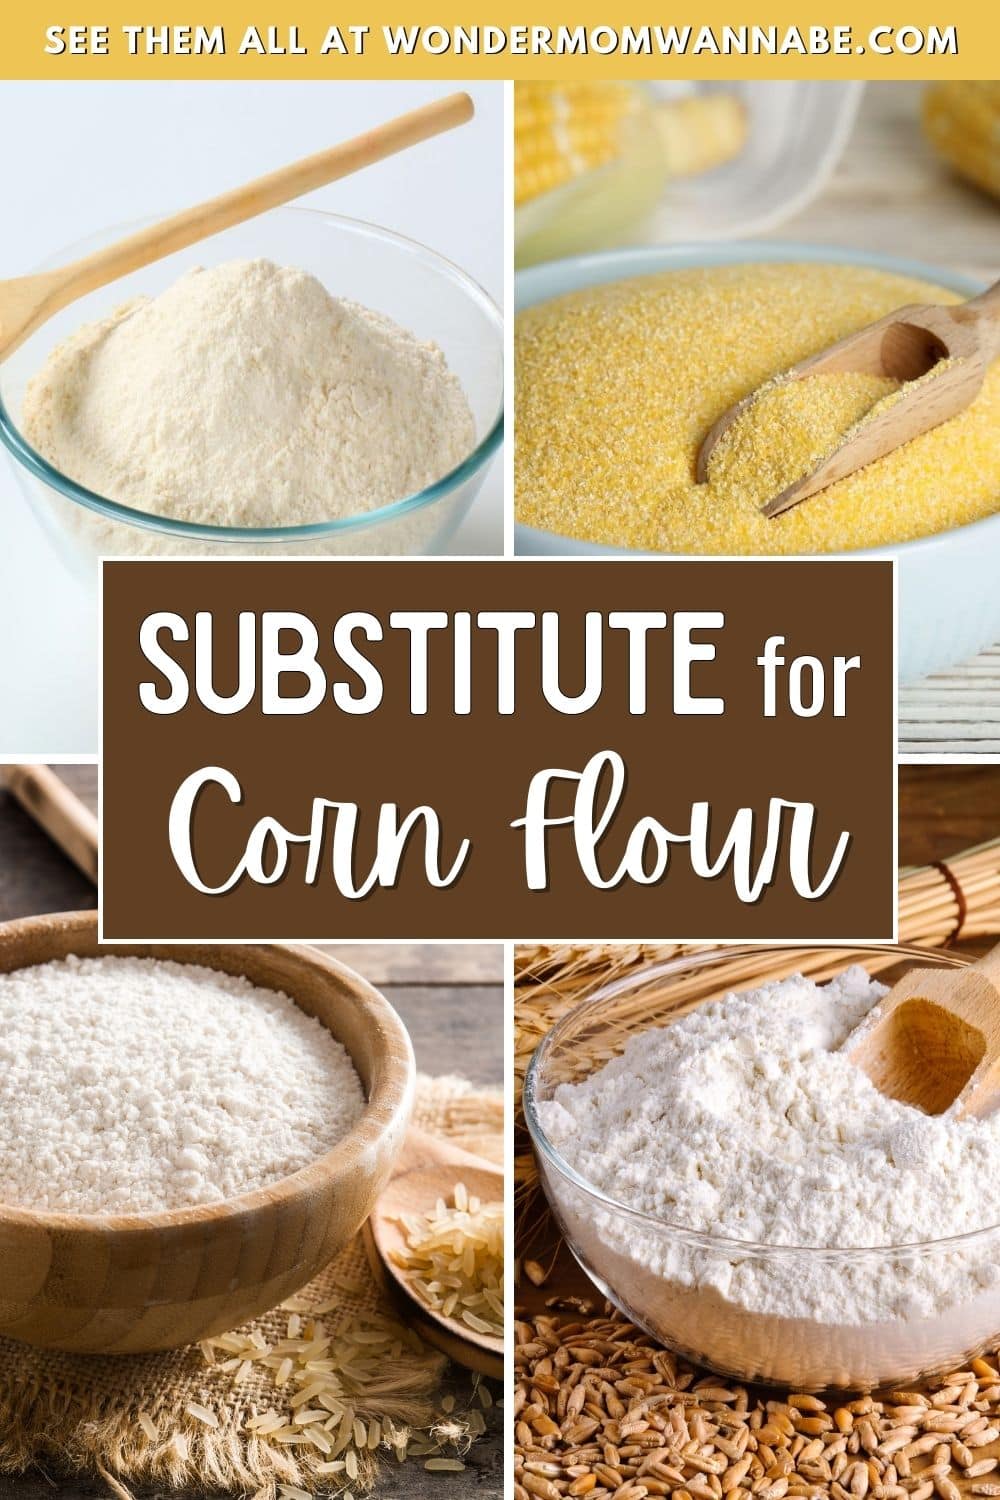 Corn Flour Substitute options displayed in four images.